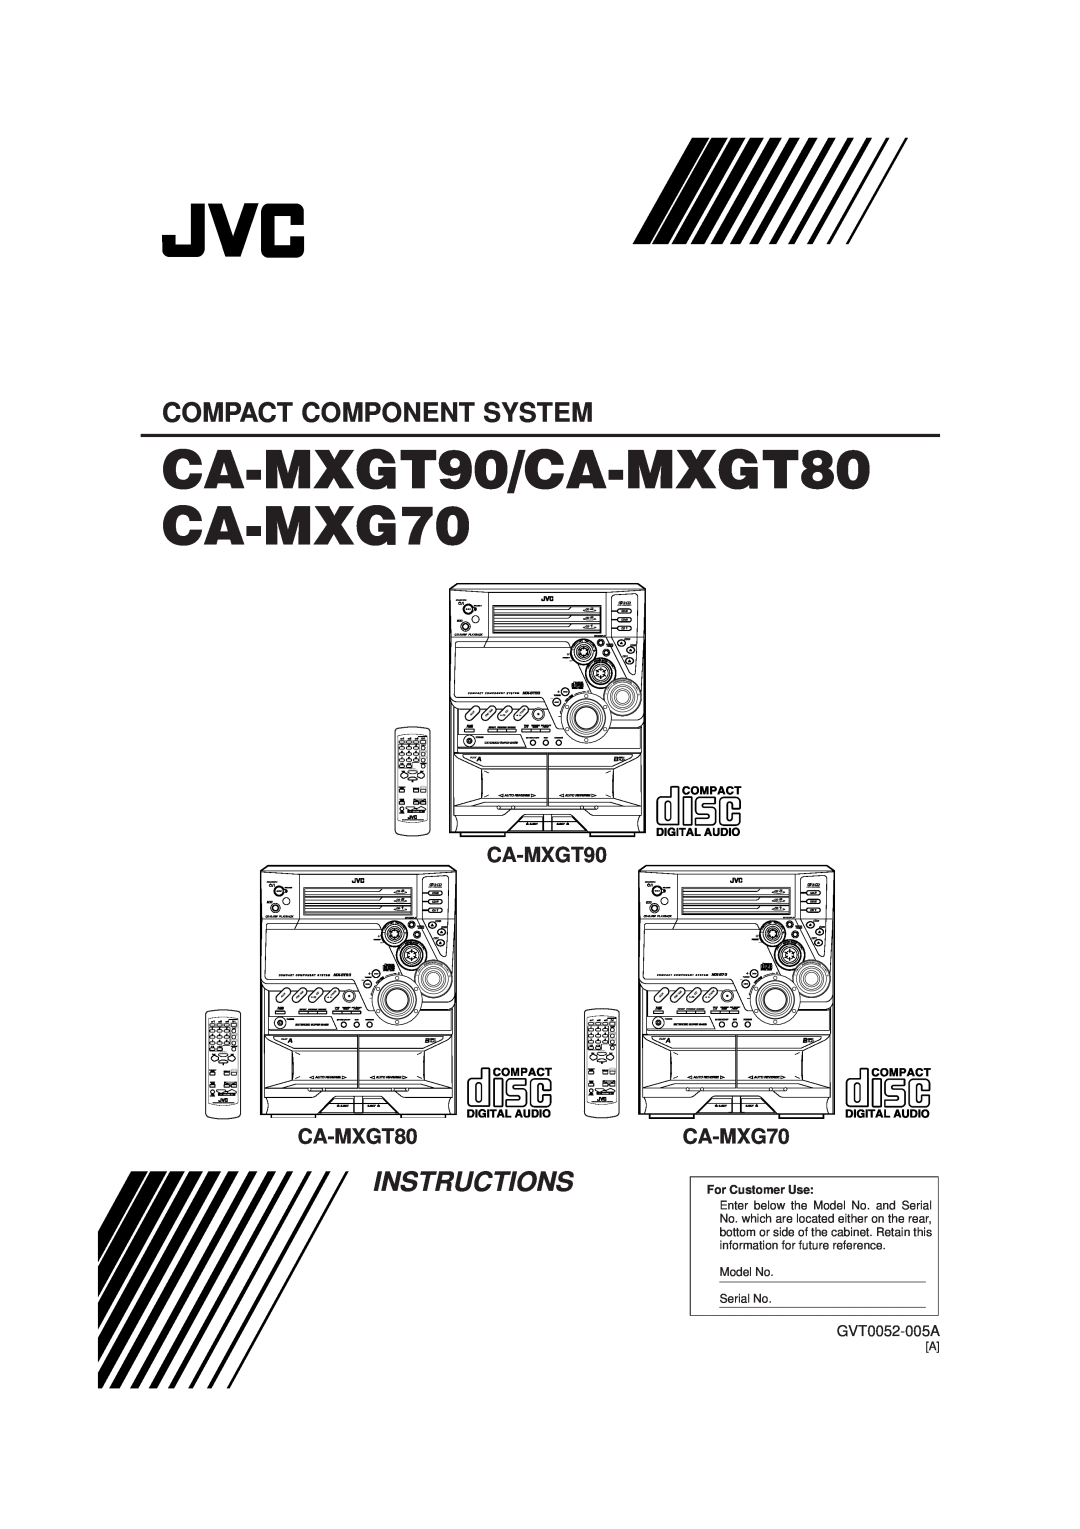 JVC manual GVT0052-005A, CA-MXGT90/CA-MXGT80 CA-MXG70, Compact Component System, Instructions, For Customer Use 